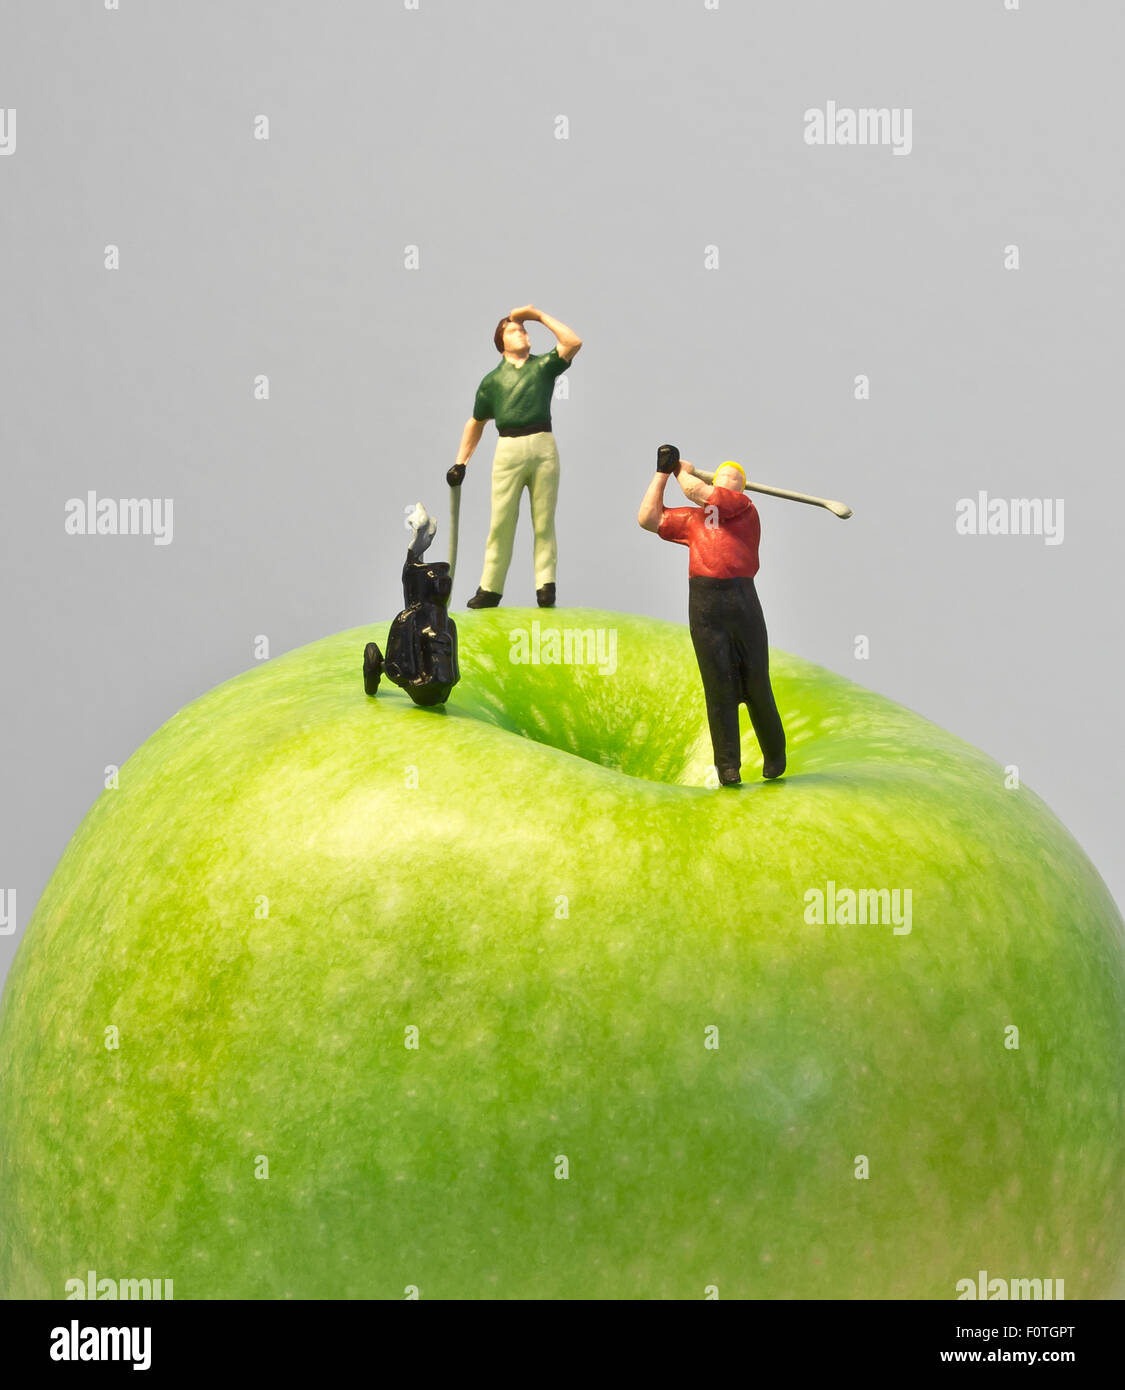 Miniature golf on apple, macro shot of golfing figurines playing round on top of green apple Stock Photo